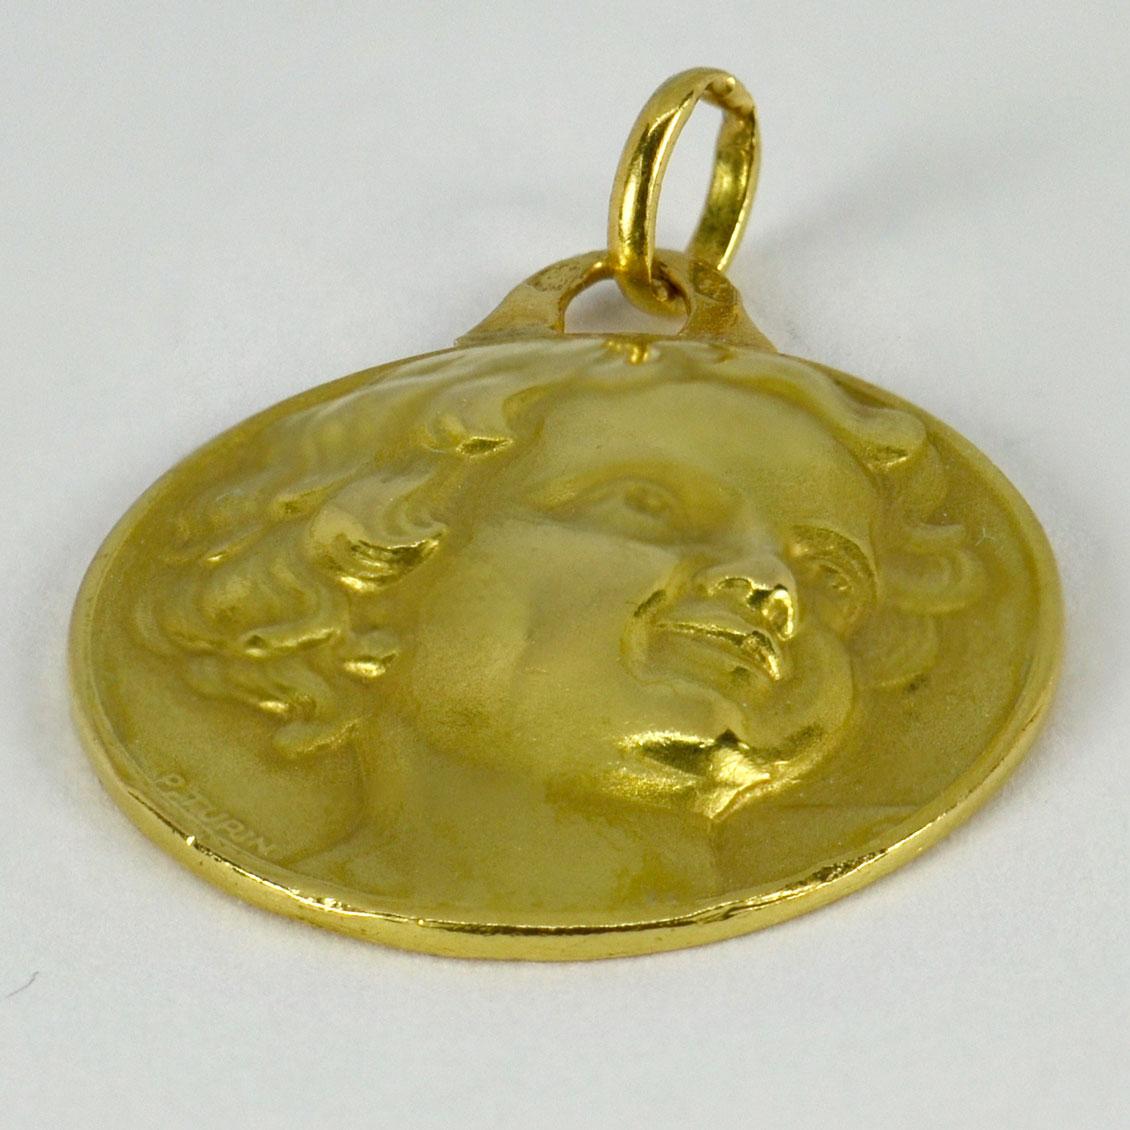 An 18 karat (18K) yellow gold charm pendant designed as a medal depicting a cherub’s head. Signed P. Turin, stamped with the eagle’s head for French manufacture and 18 karat gold.

Dimensions: 2 x 1.8 x 0.25 cm (not including jump ring)
Weight: 4.54